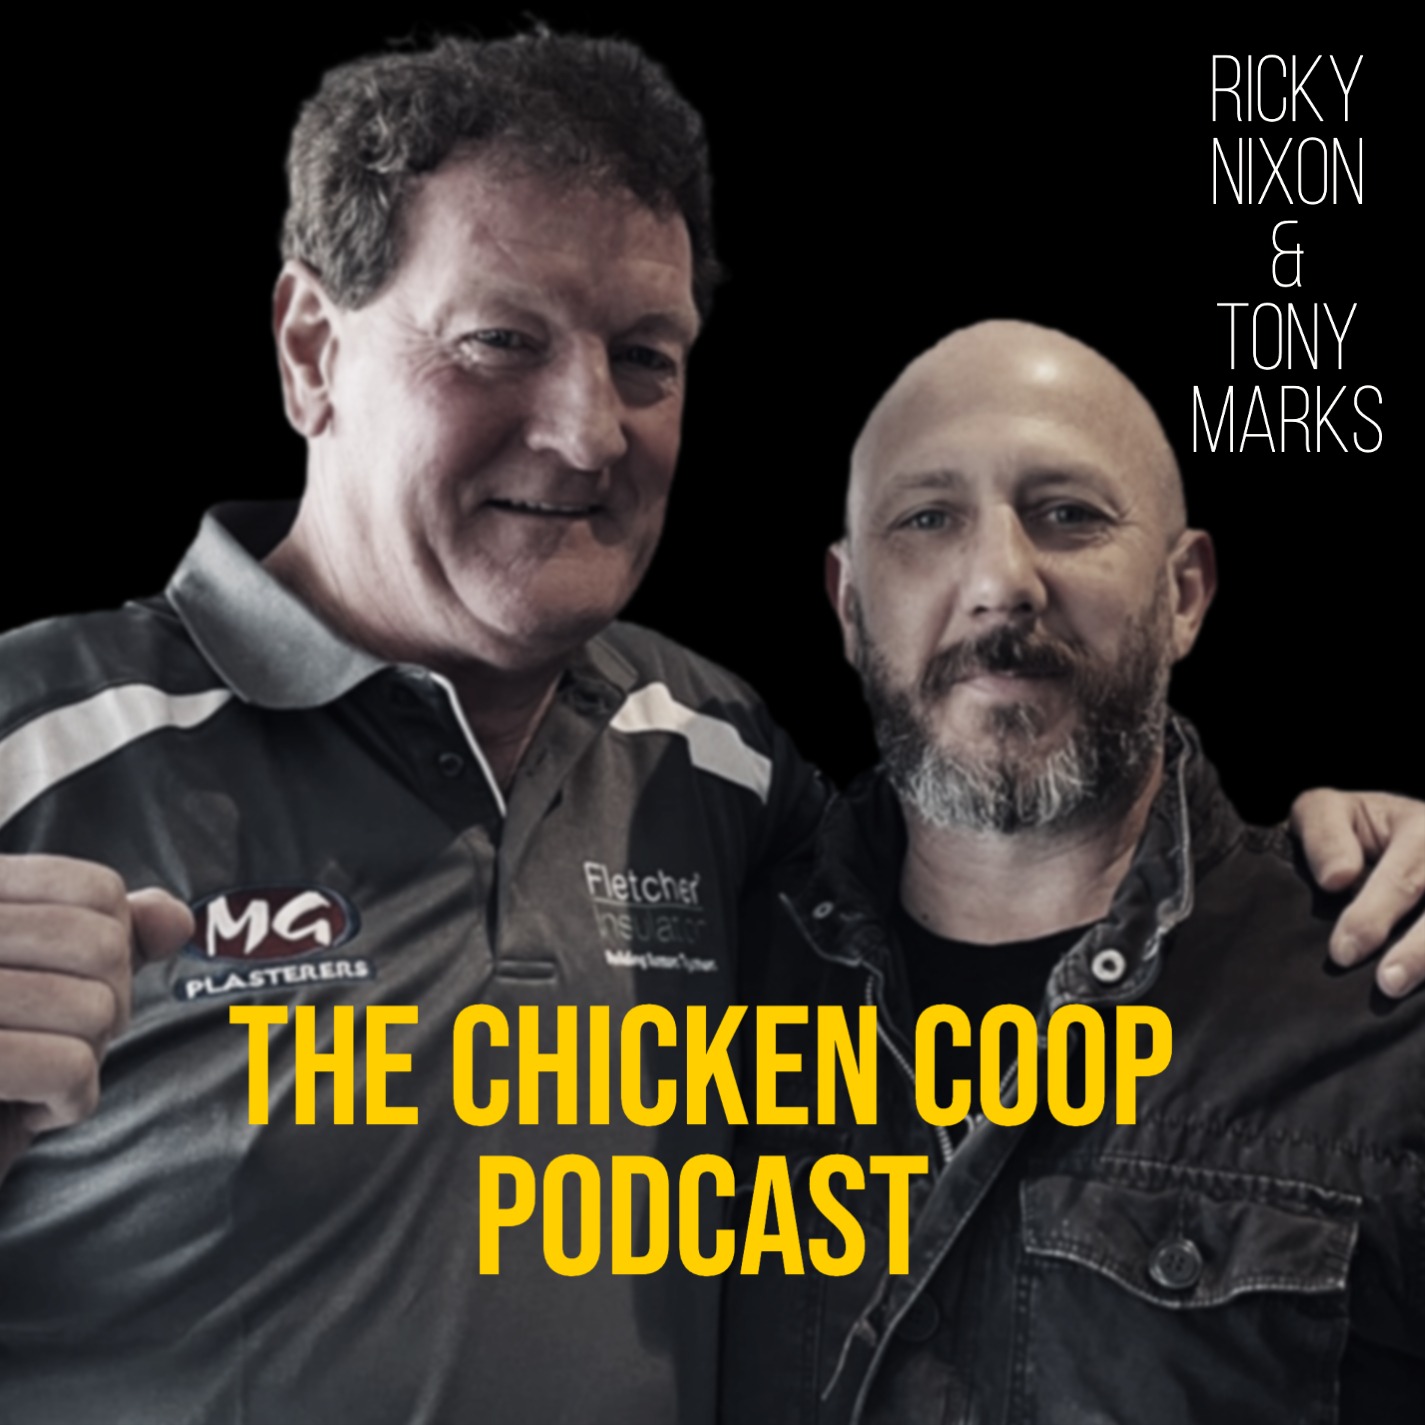 The Chicken Coop with Ricky Nixon & Tony Marks - Episode 7